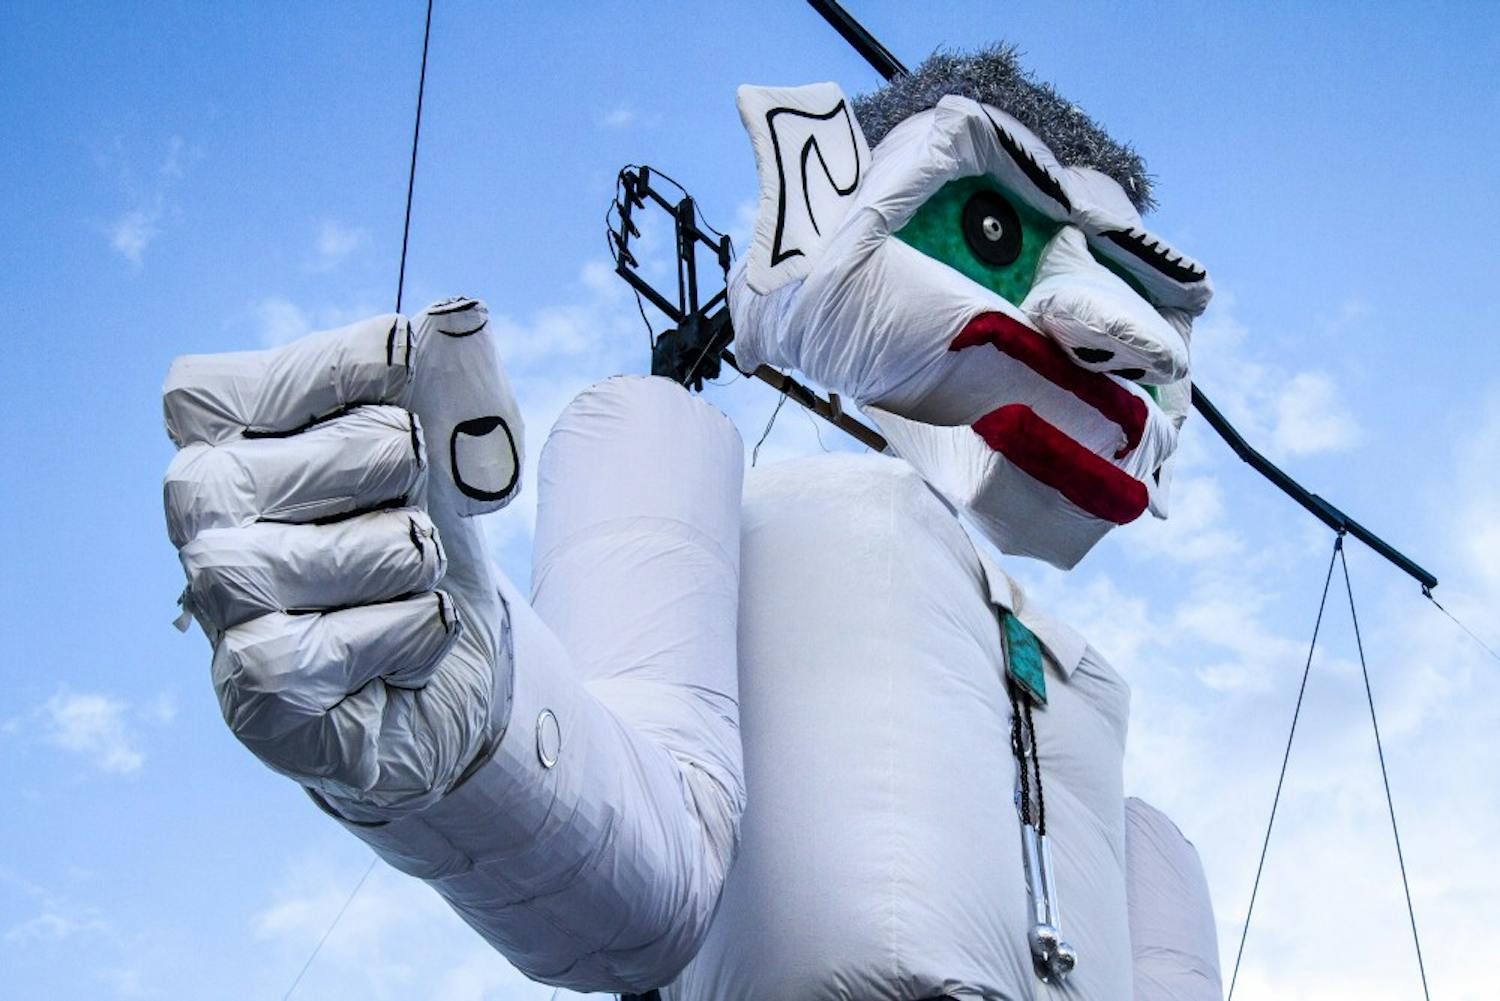 The 50-foot-tall Zozobra marionette is suspended midday on the first day of Fiestas De Santa Fe on Monday, Aug. 31, 2018.